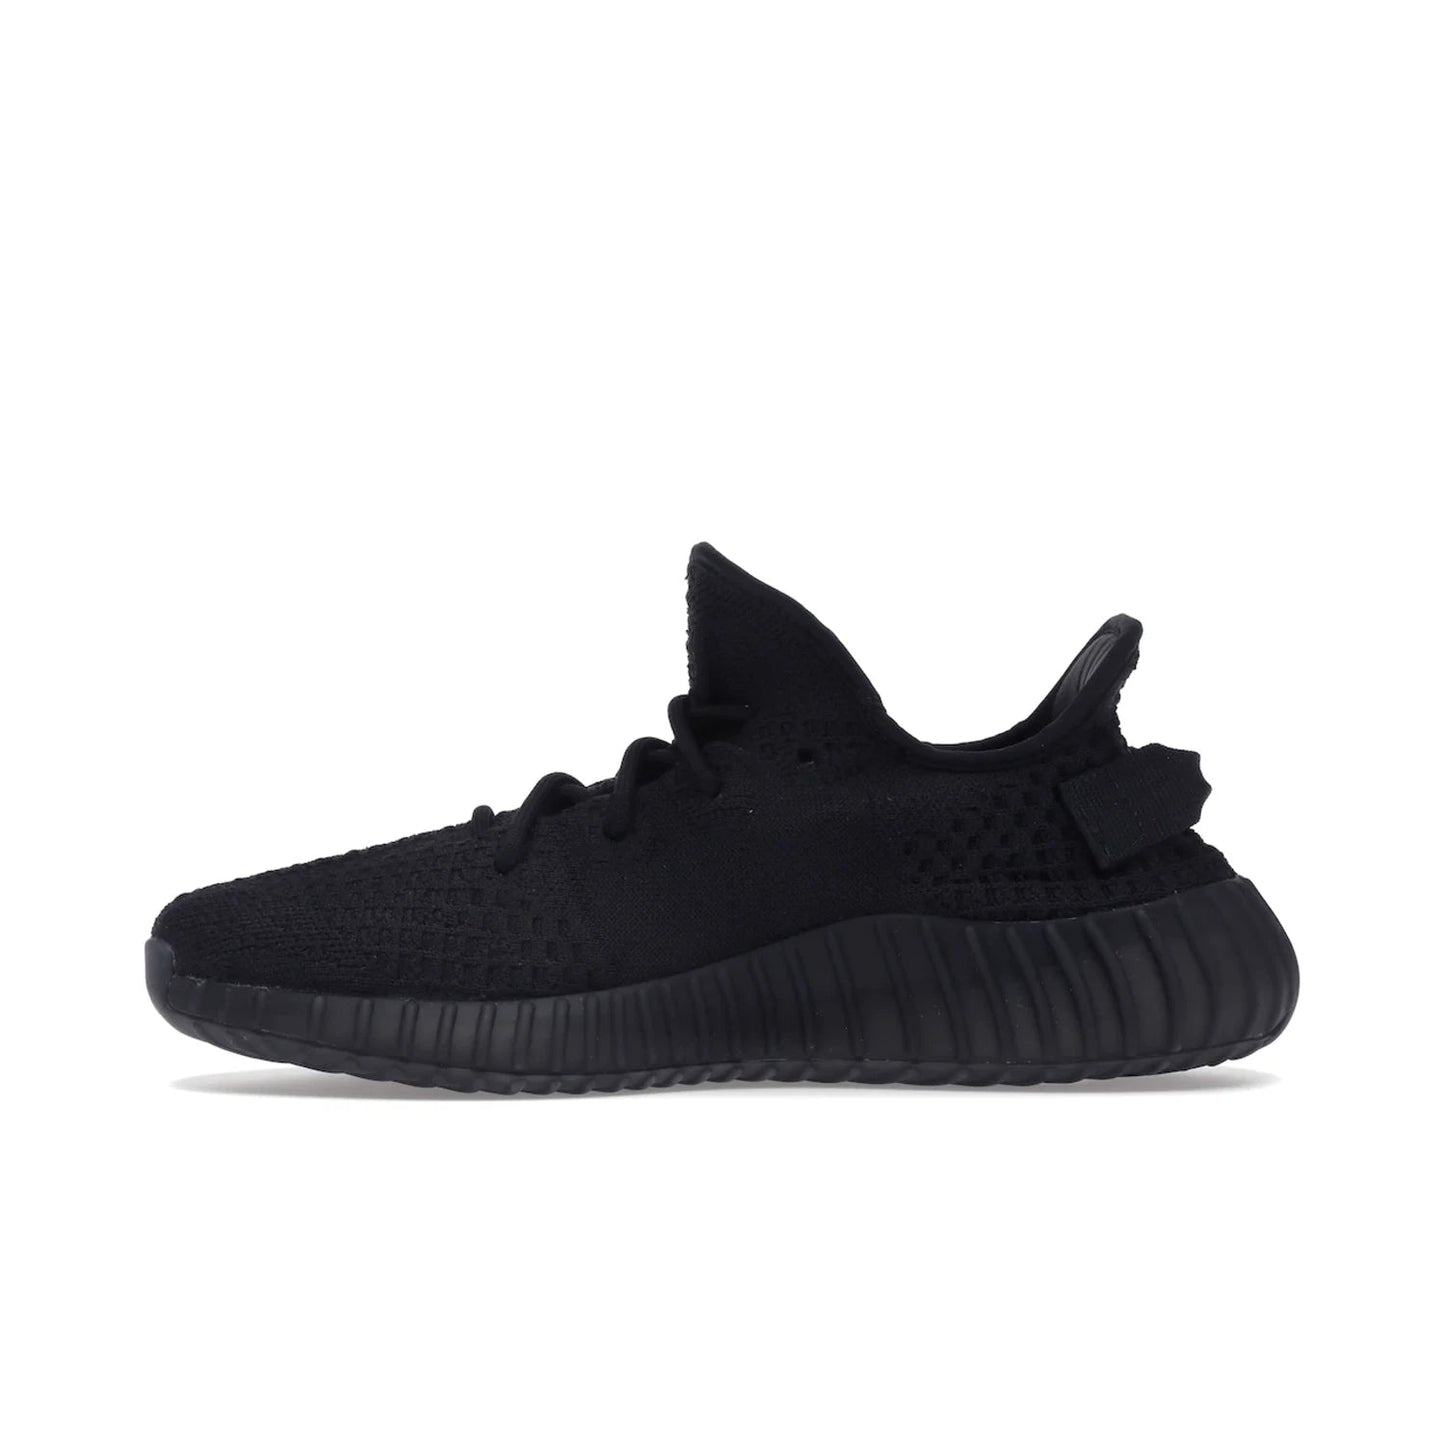 adidas Yeezy Boost 350 V2 Onyx - Image 19 - Only at www.BallersClubKickz.com - Adidas Yeezy Boost 350 V2 Onyx Triple Black shoes for comfort and style. Arriving Spring 2022.